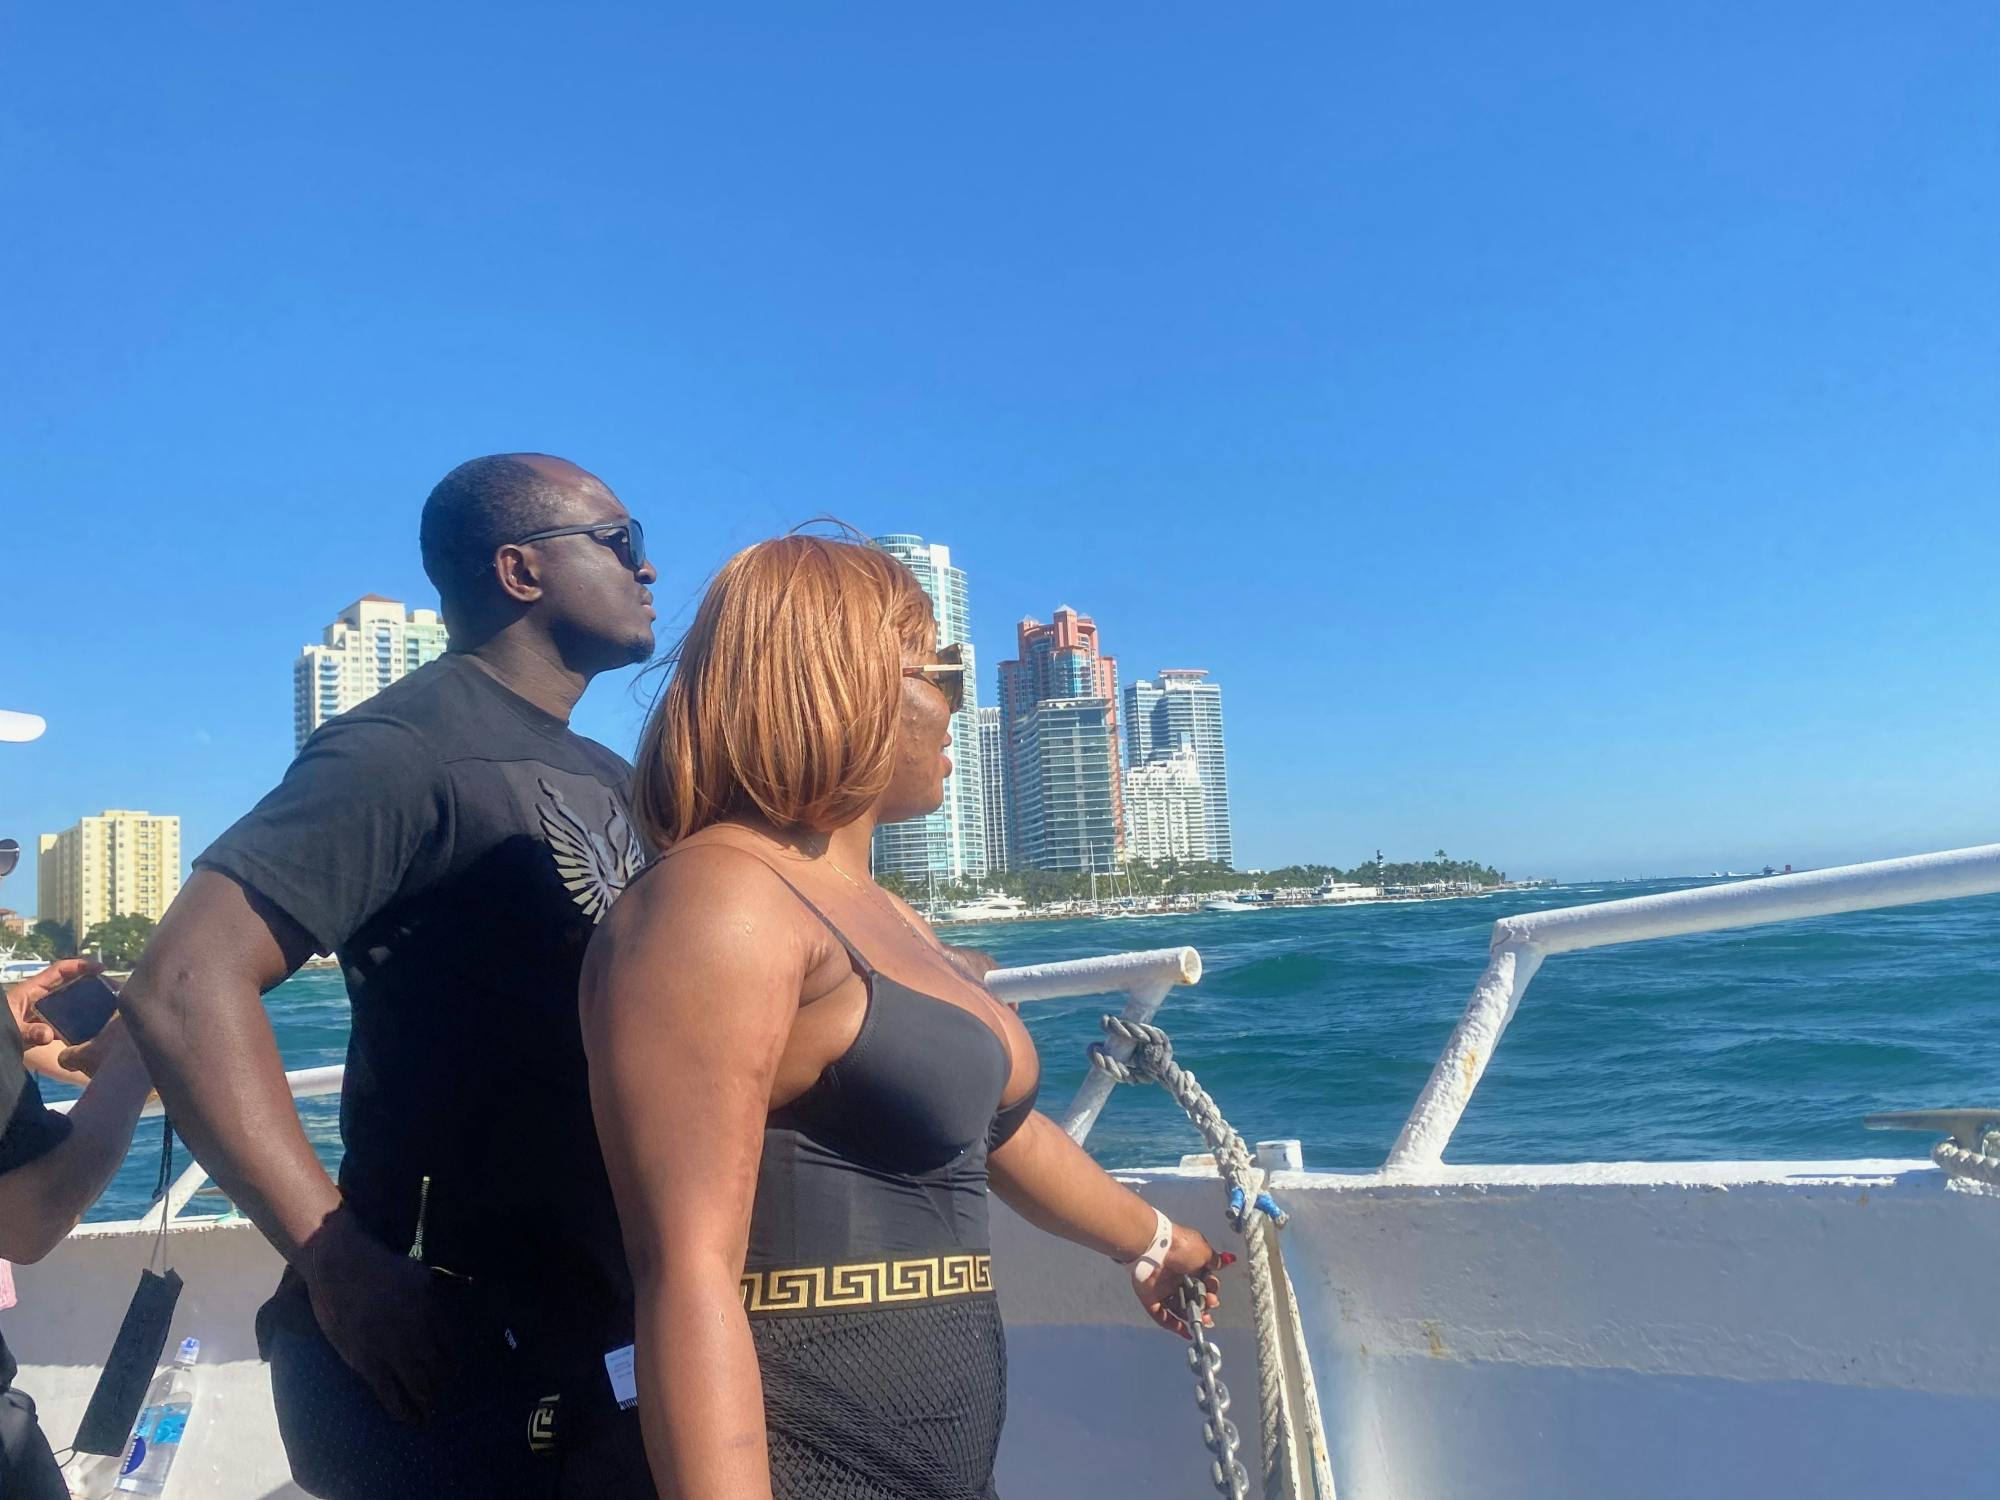 Miami 90 minute Millionaire's Row cruise with hop on off bus tour